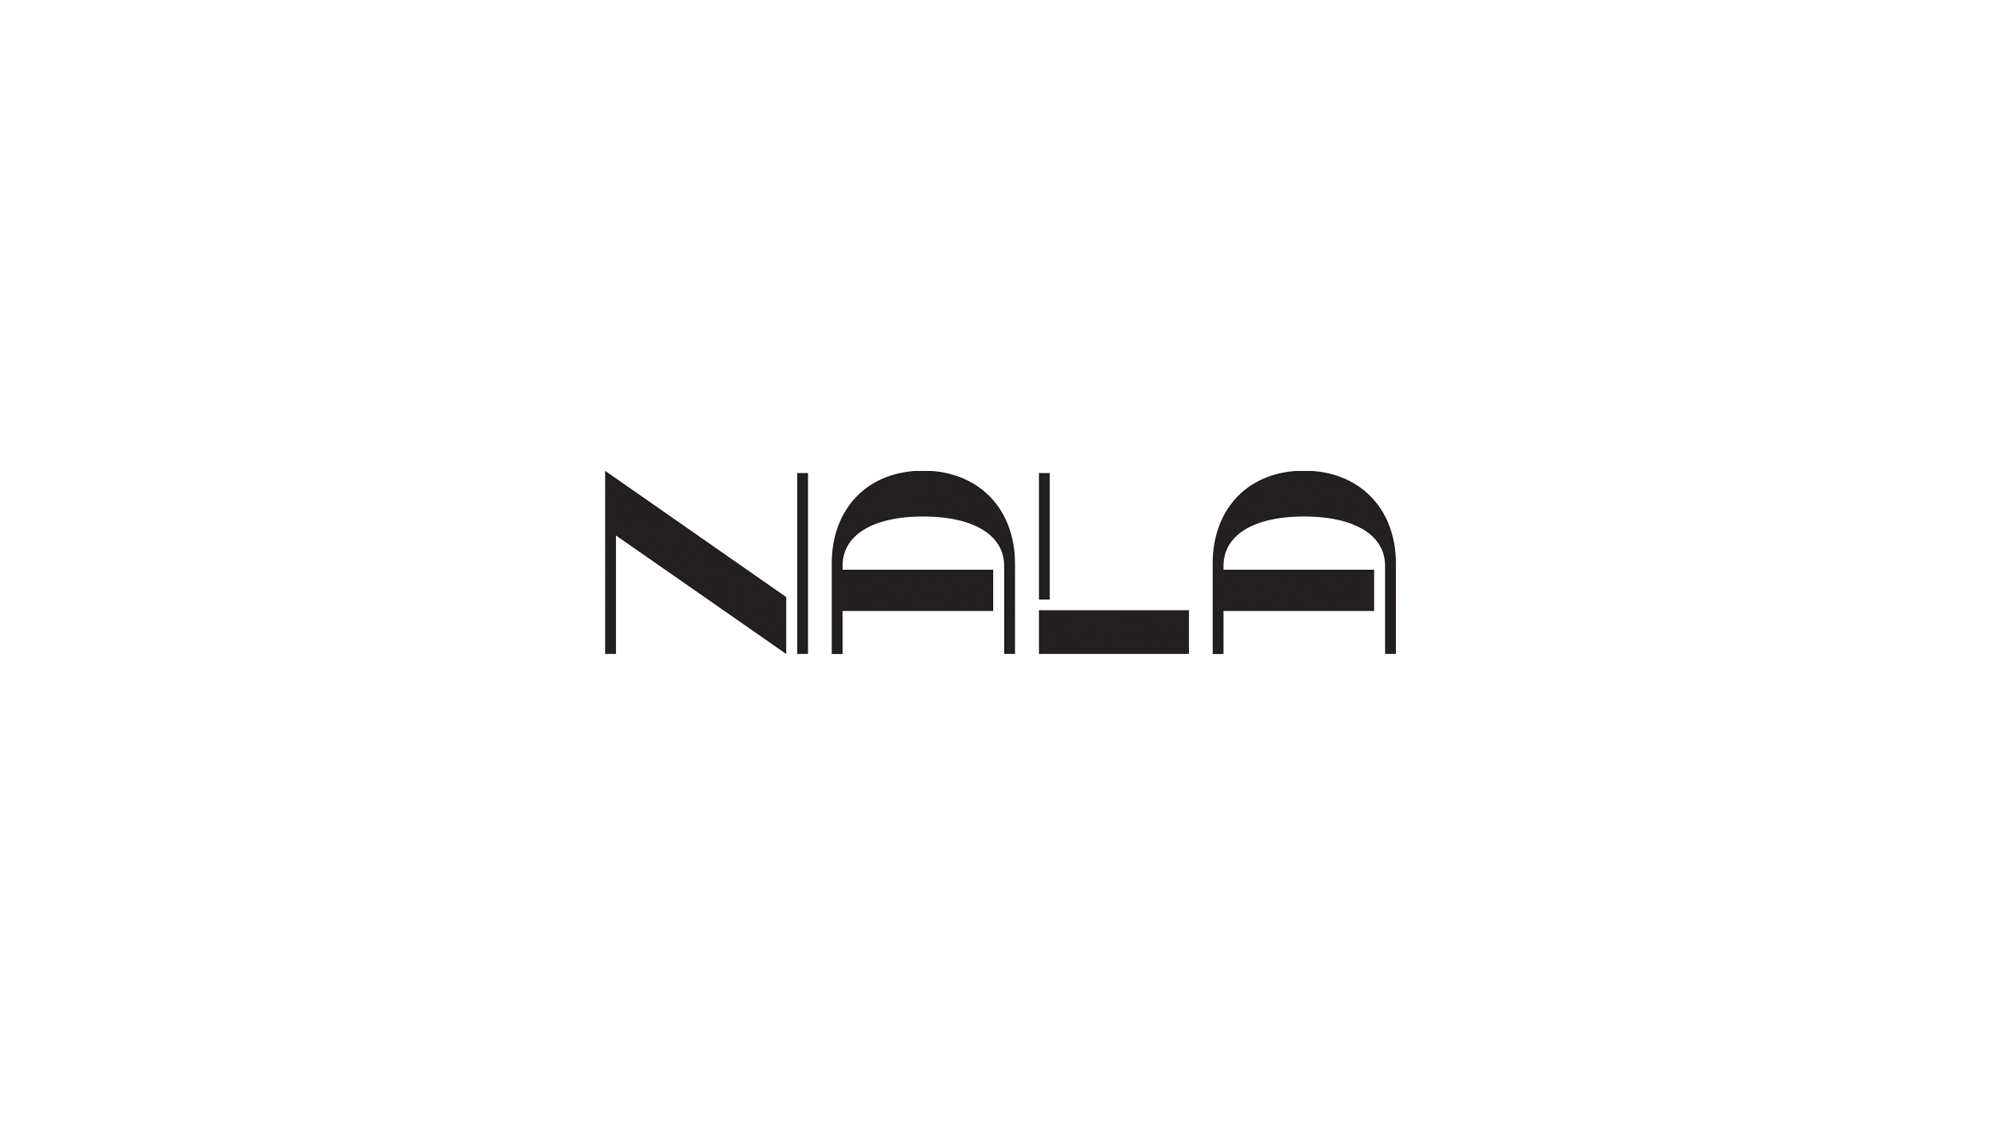 Brand New: New Logo, Identity, and Packaging for Nala by Universal Favourite